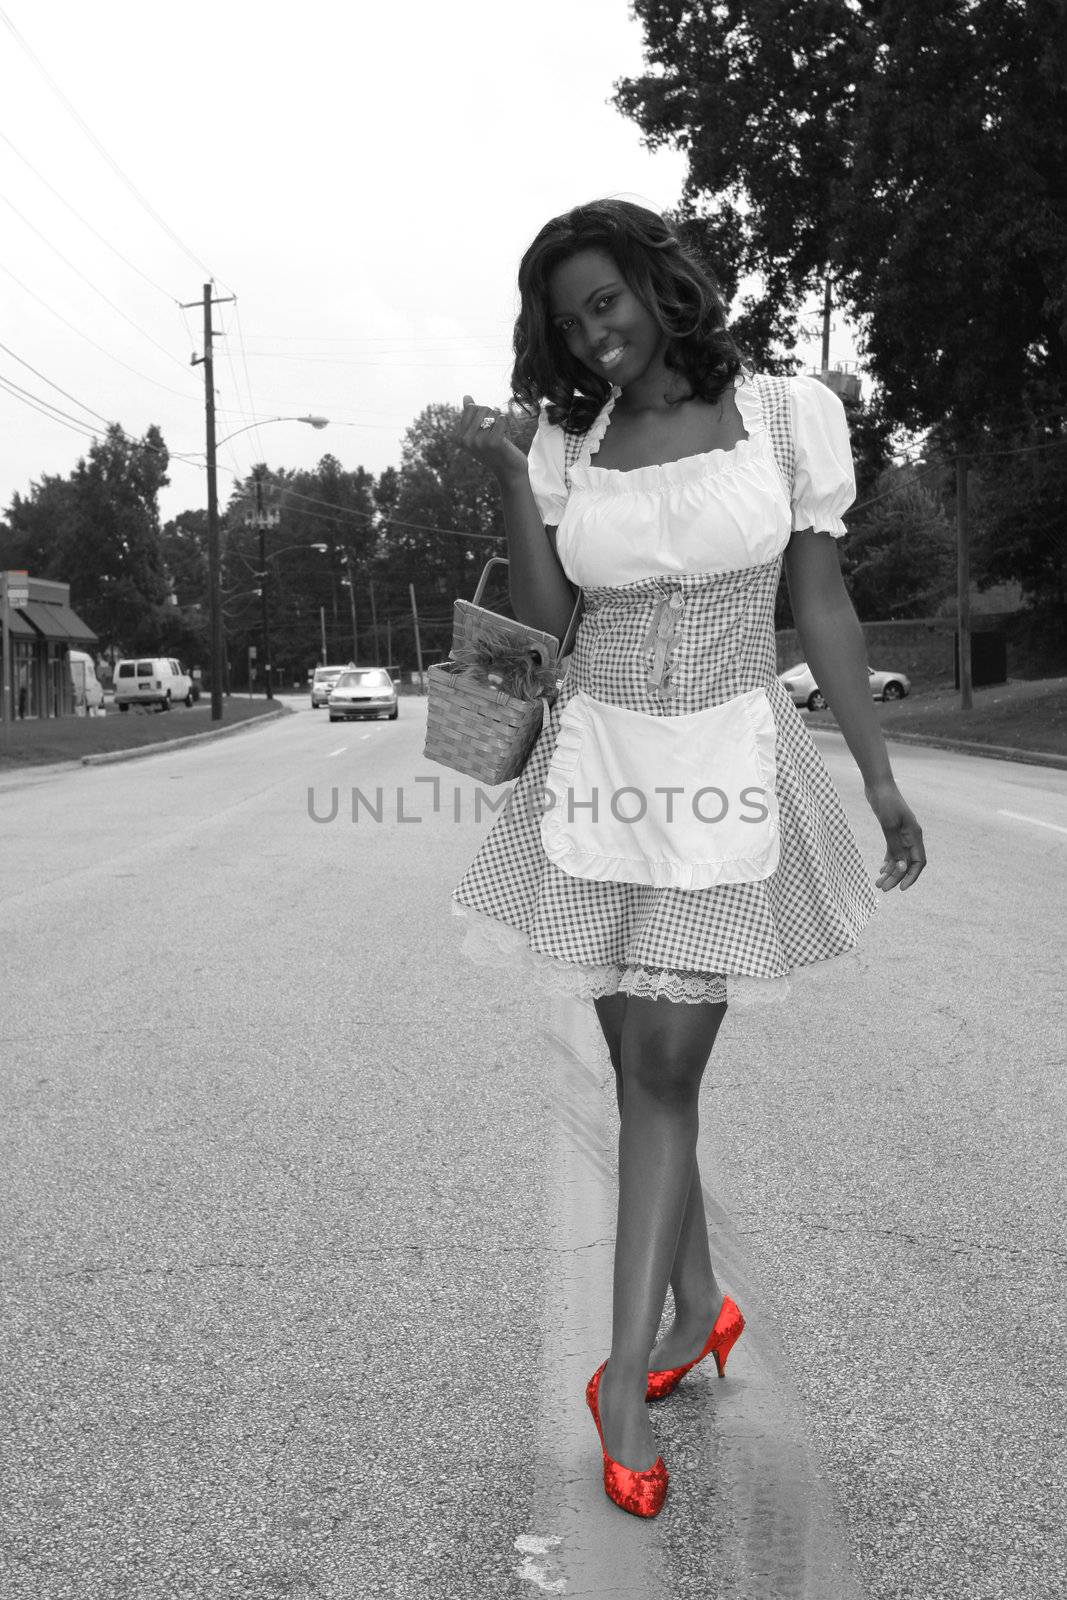 Modern Day Dorothy, desaturated with red ruby shoes